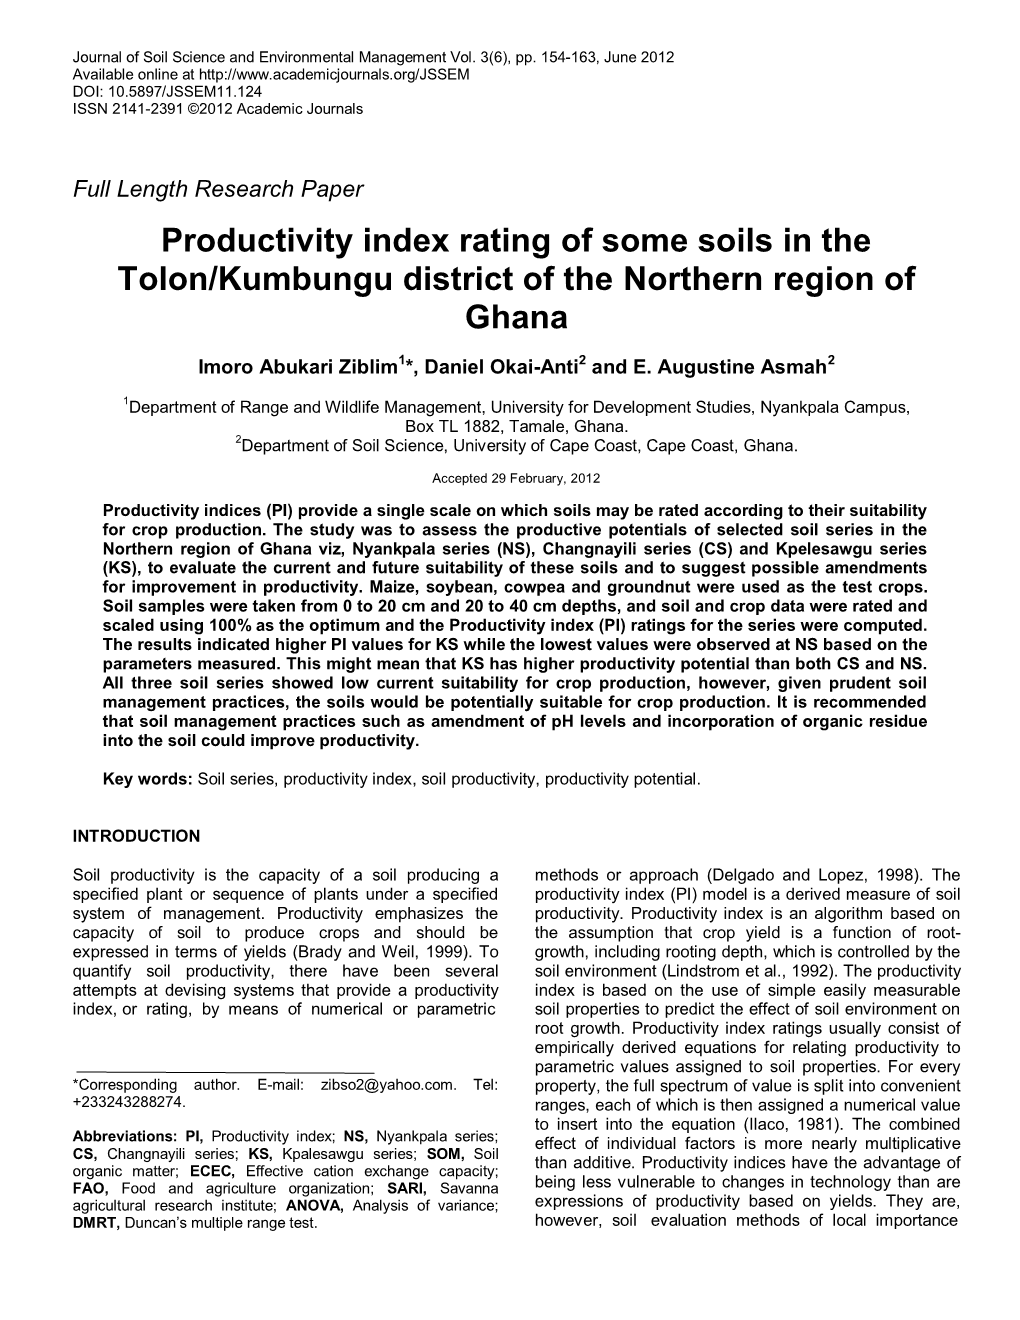 Productivity Index Rating of Some Soils in the Tolon/Kumbungu District of the Northern Region of Ghana